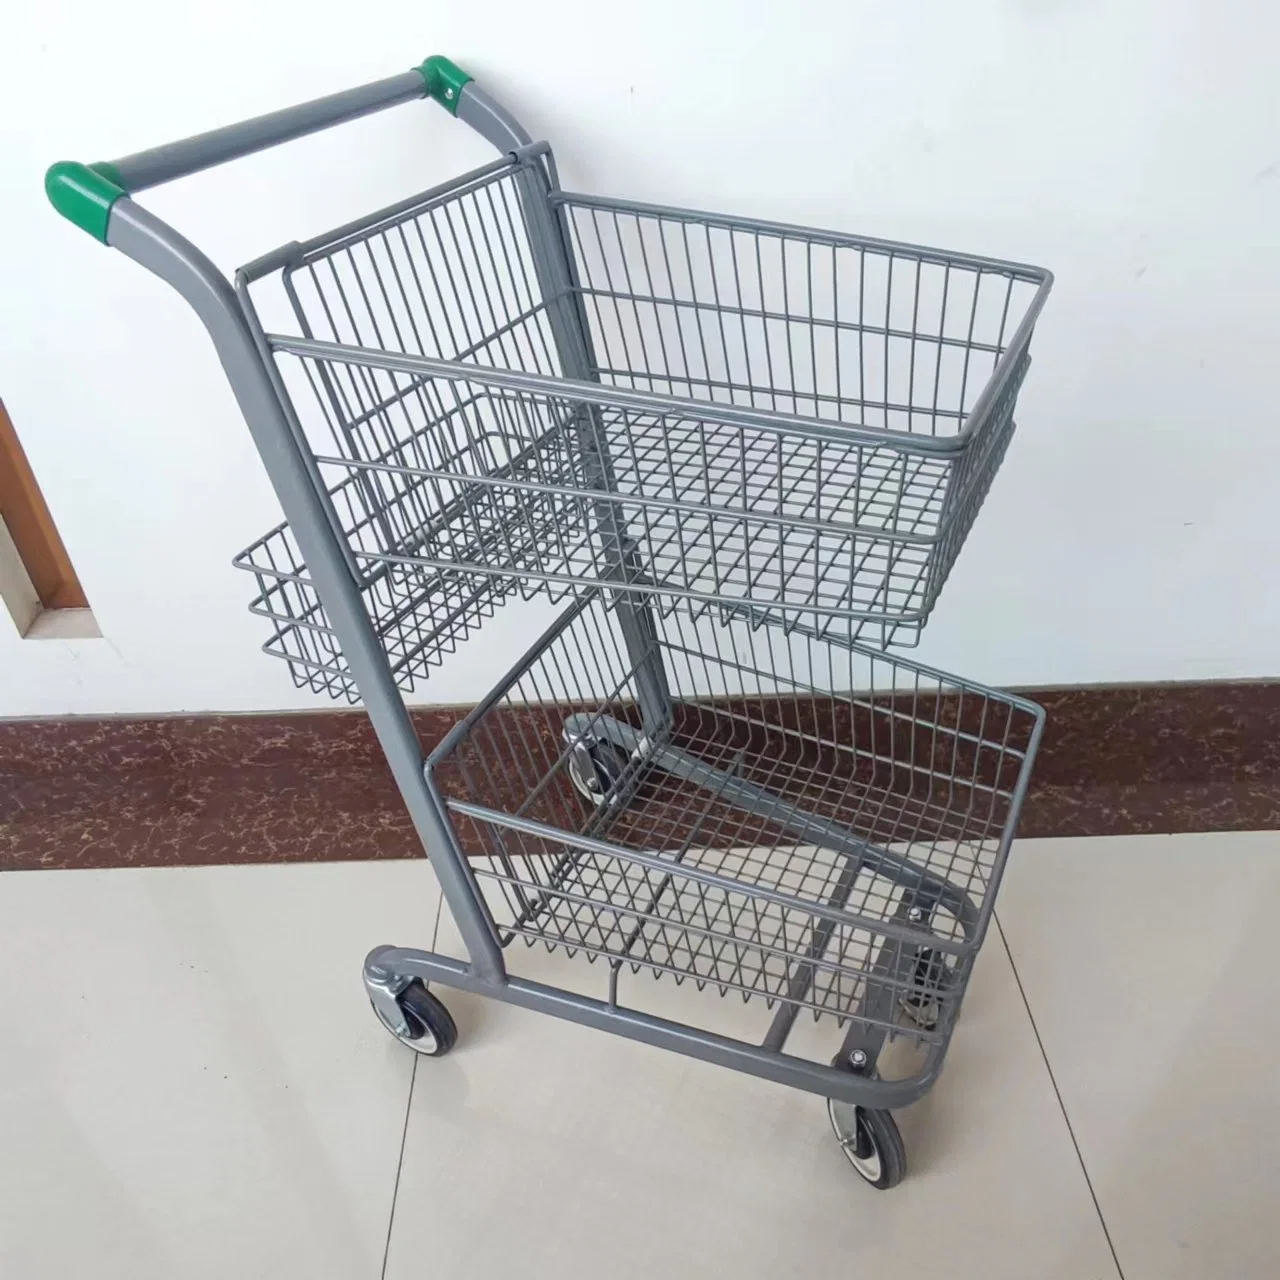 Best Selling Double Layer Shopping Basket Trolley Cart